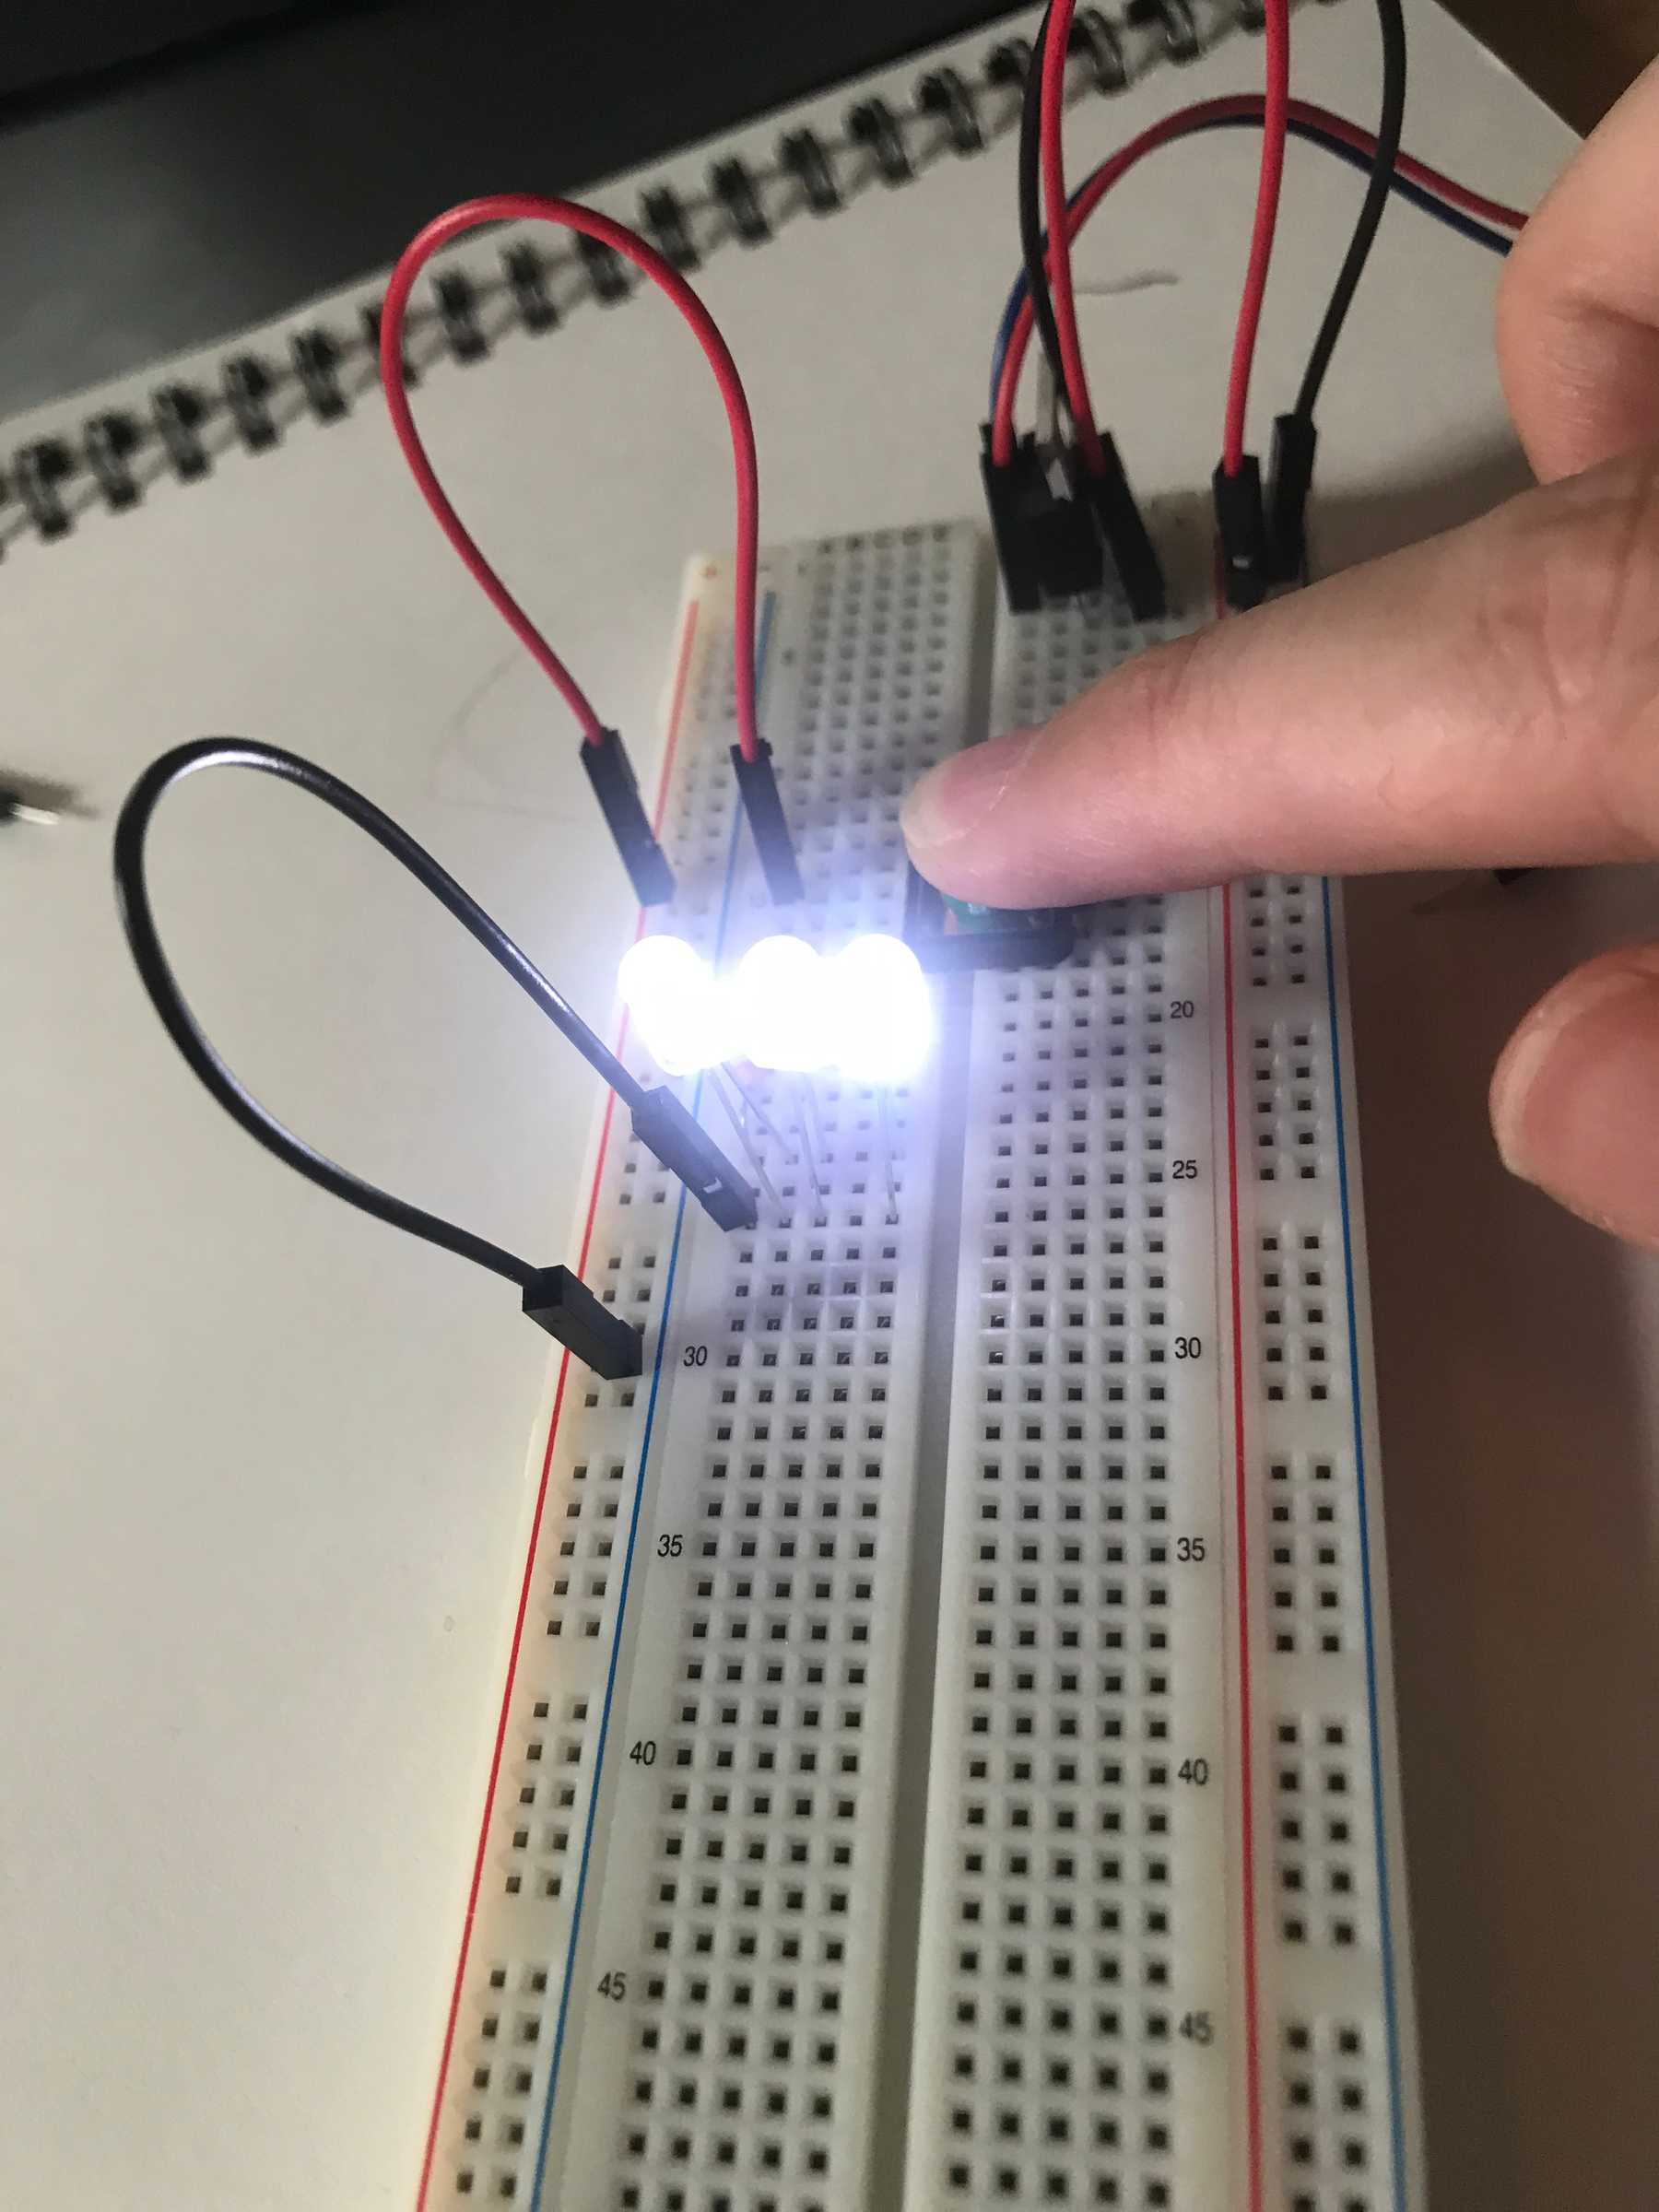 Three LEDs in parallel illuminate when the button is pressed